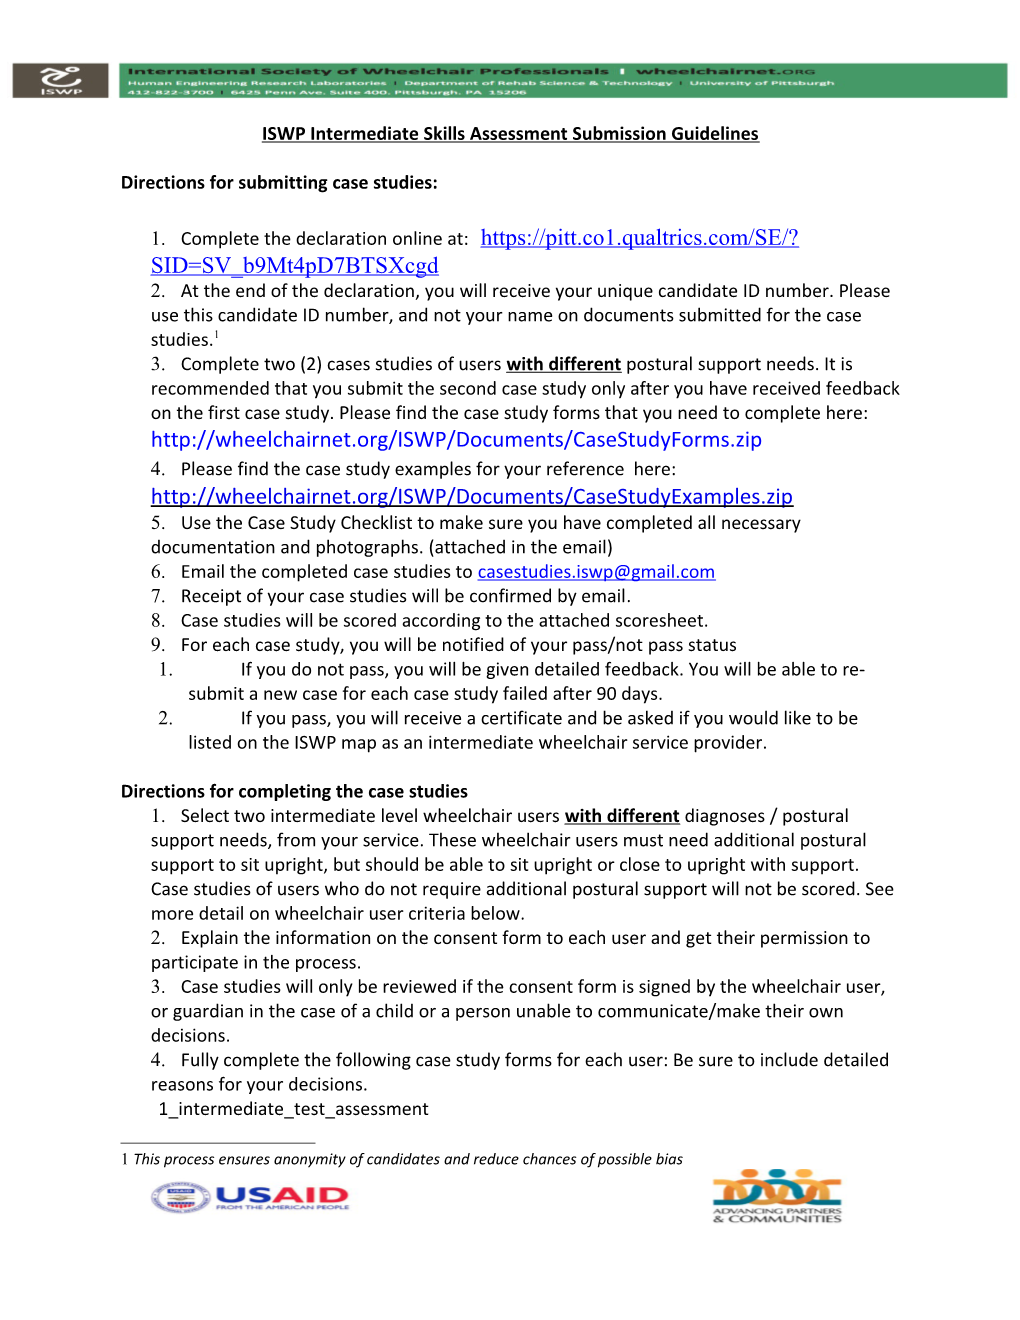 ISWP Intermediate Skills Assessment Submission Guidelines